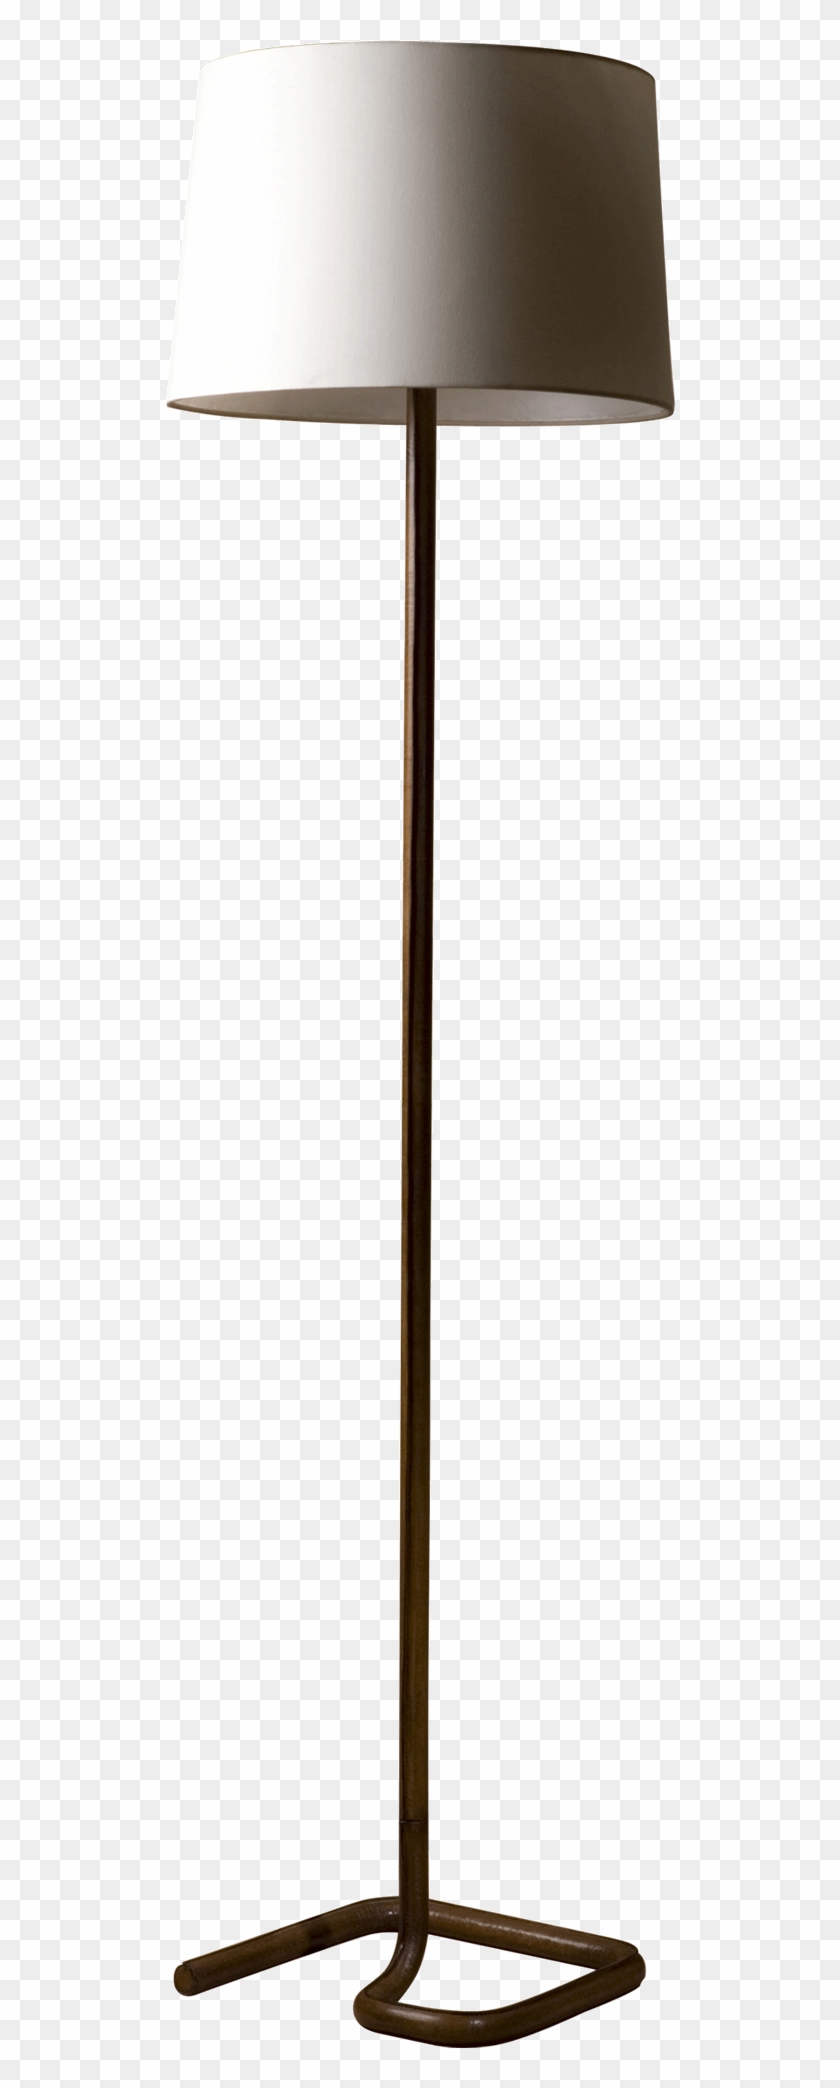 Png Library Library Railway Standing Portsidecaf - Standing Lamp Transparent Clipart #507657